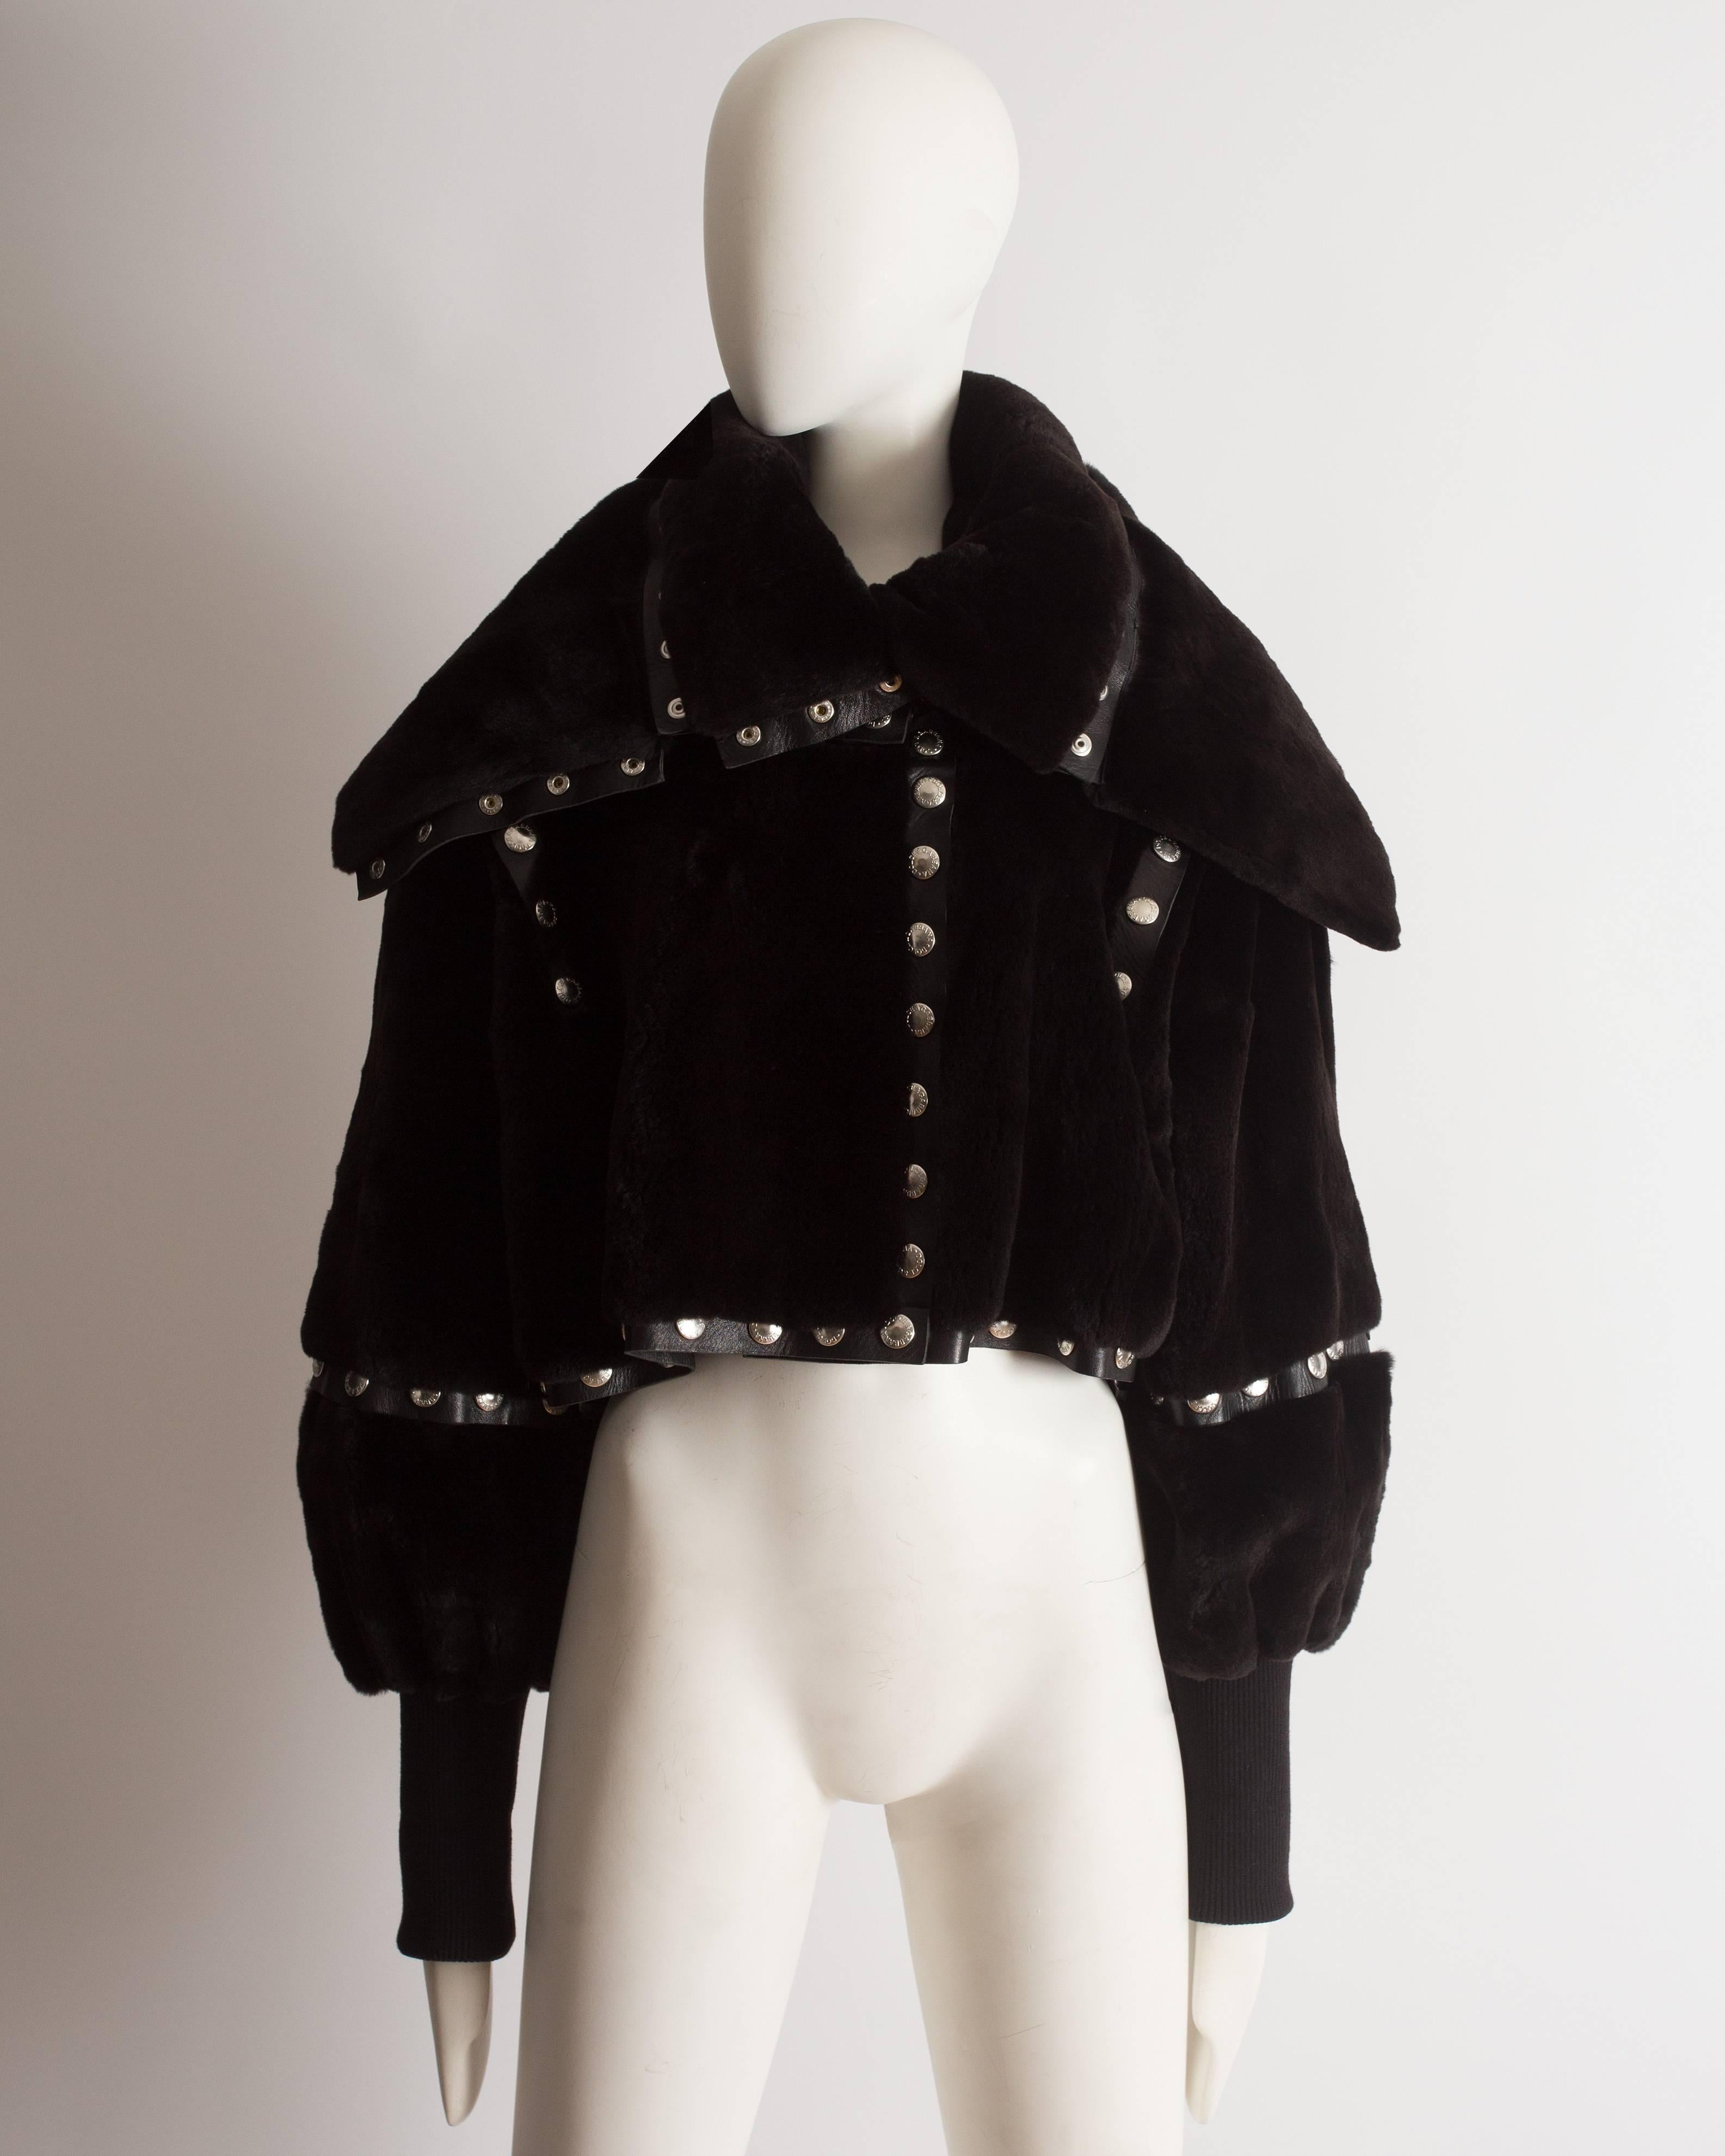 Dolce & Gabbana cropped fur jacket constructed in incredibly soft black sheared beaver fur and leather. The jacket features 146 silver stud button closures throughout and can be adjusted to a short sleeved or collarless jacket. 

Autumn-Winter